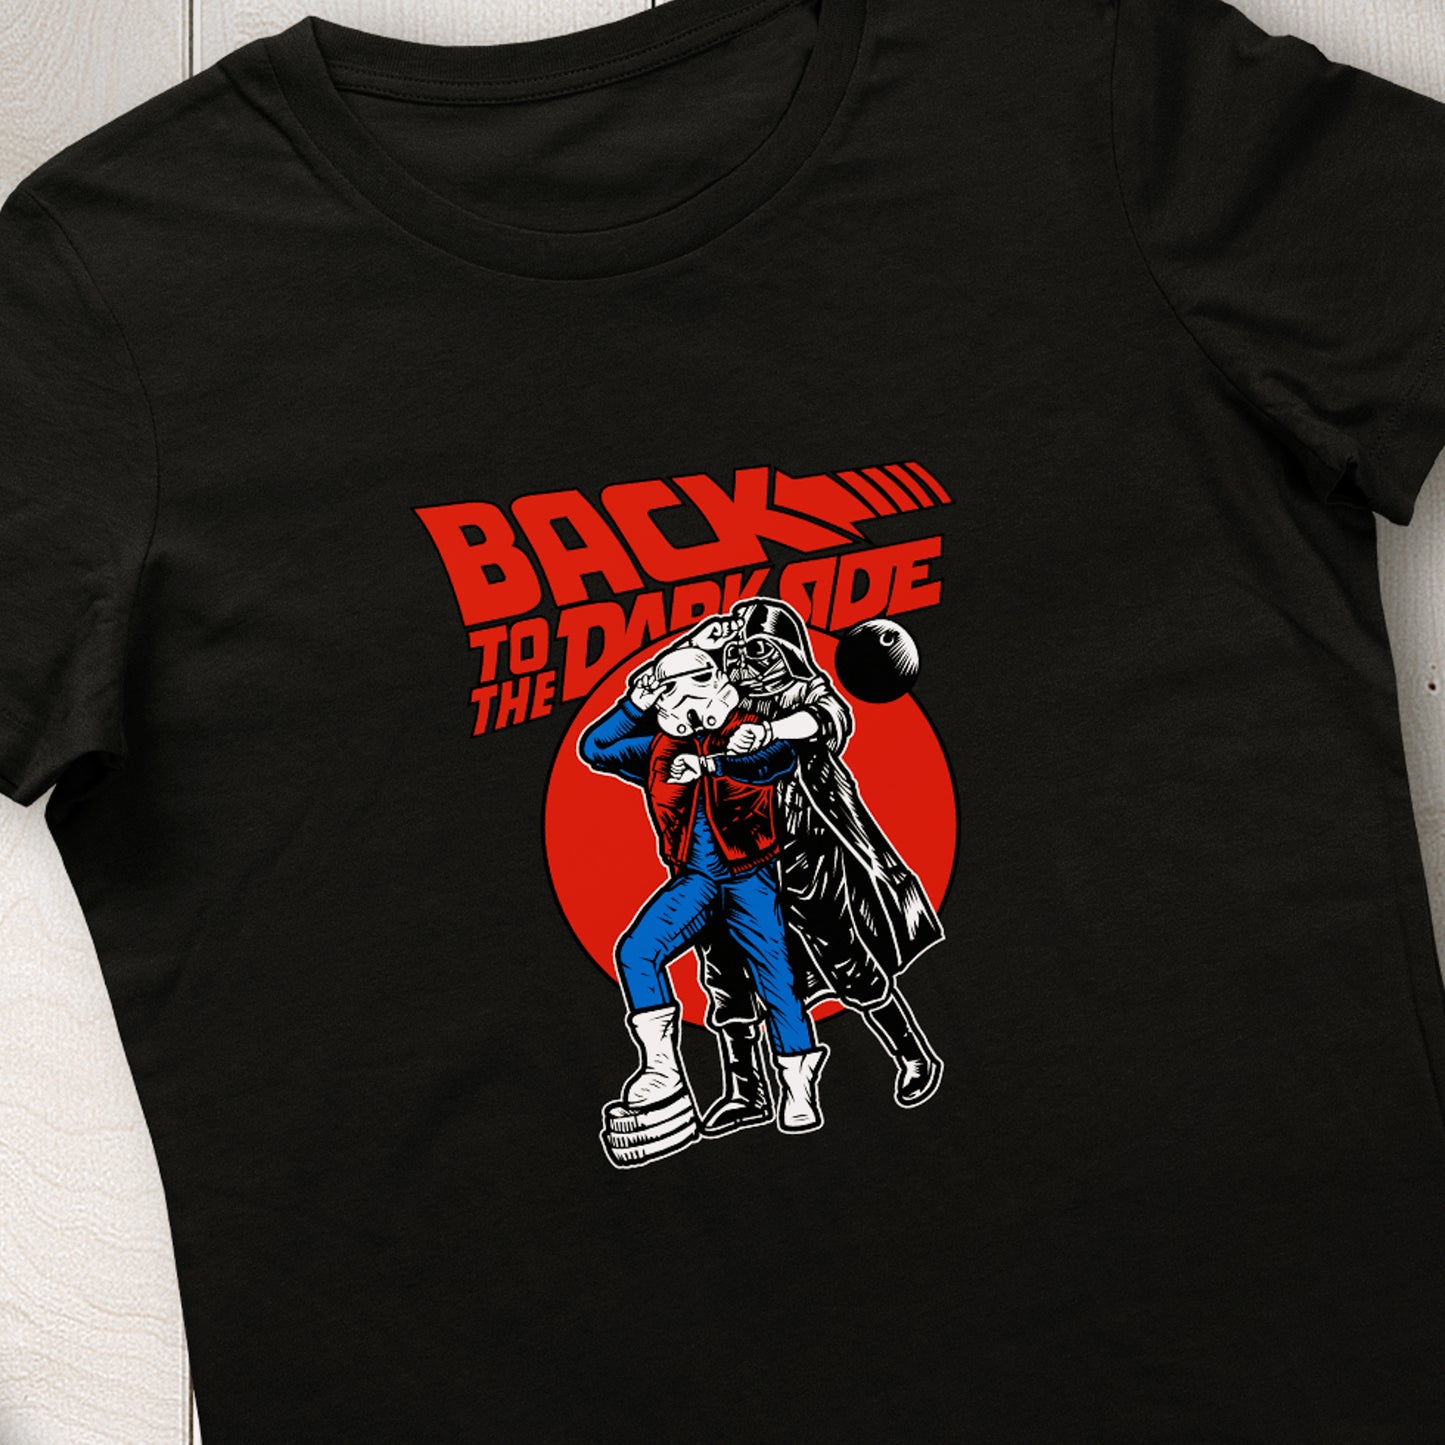 Back To The Darkside Tshirt Woman